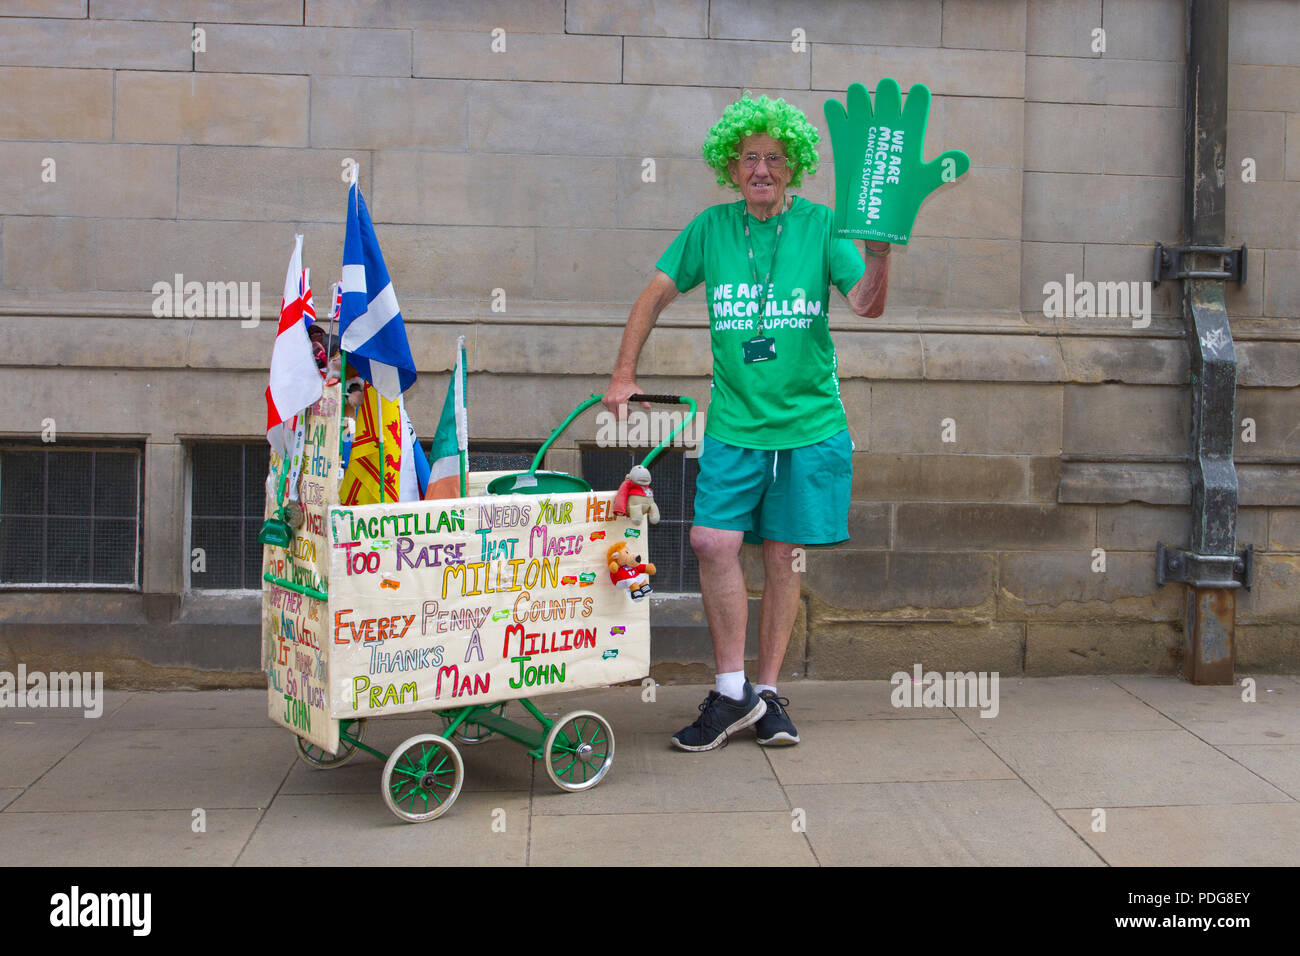 Pram man John a charity worker & collector for Macmillan Cancer support wearing a green wig and wheeling a wooden pram in Sheffield, UK. Macmillan Cancer Support is one of the largest British charities and provides specialist health care, information and financial support to people affected by cancer Stock Photo